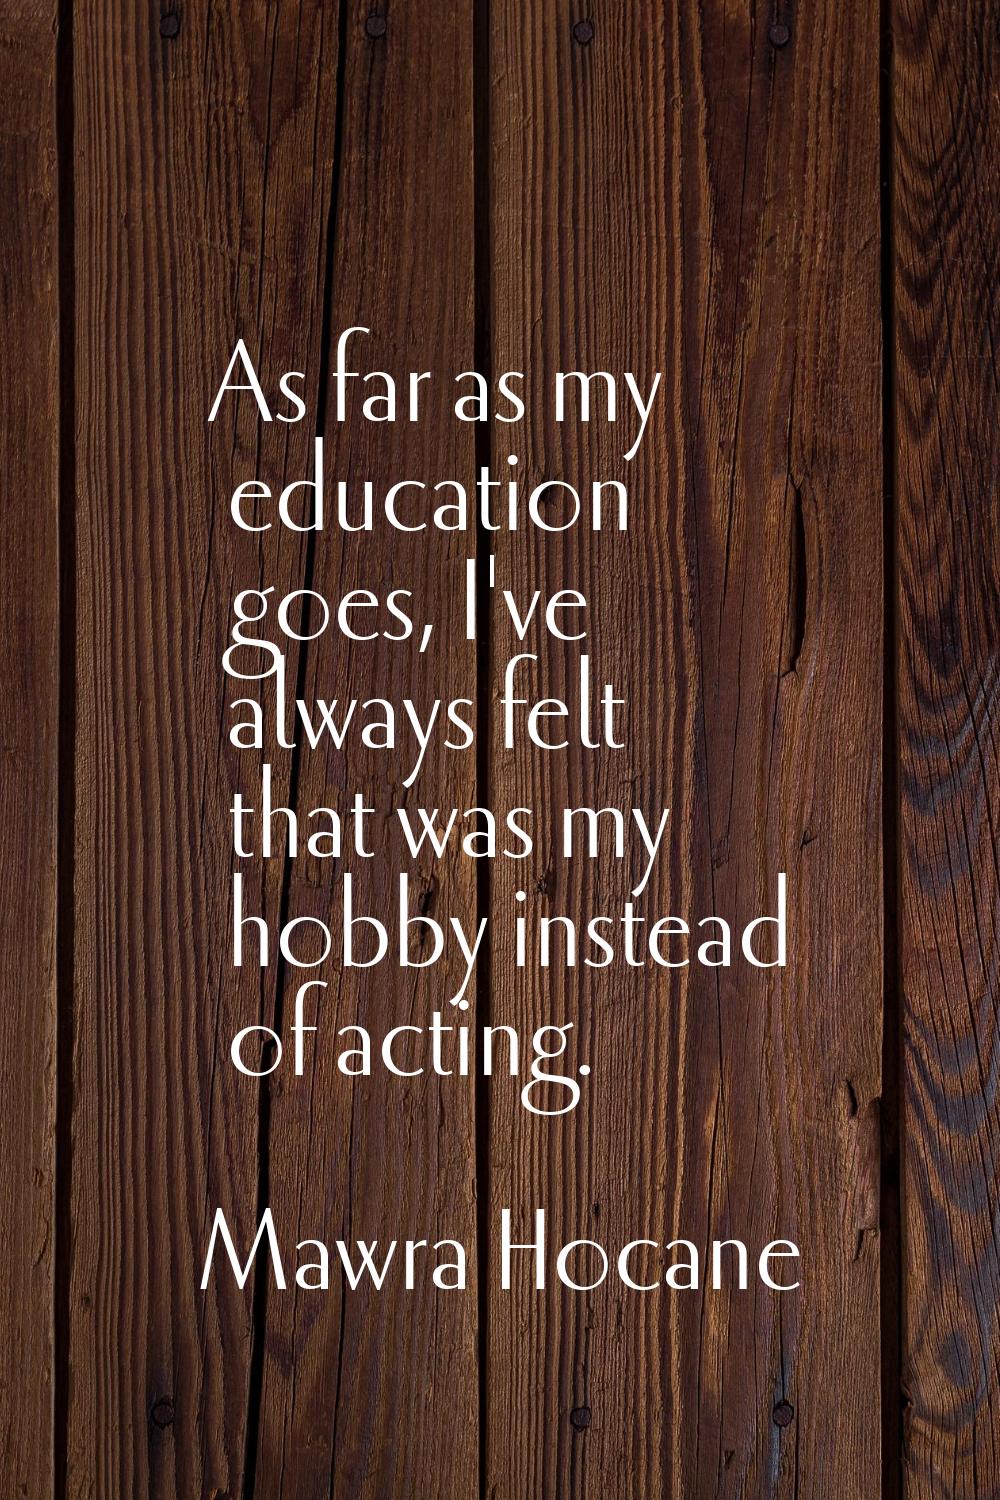 As far as my education goes, I've always felt that was my hobby instead of acting.